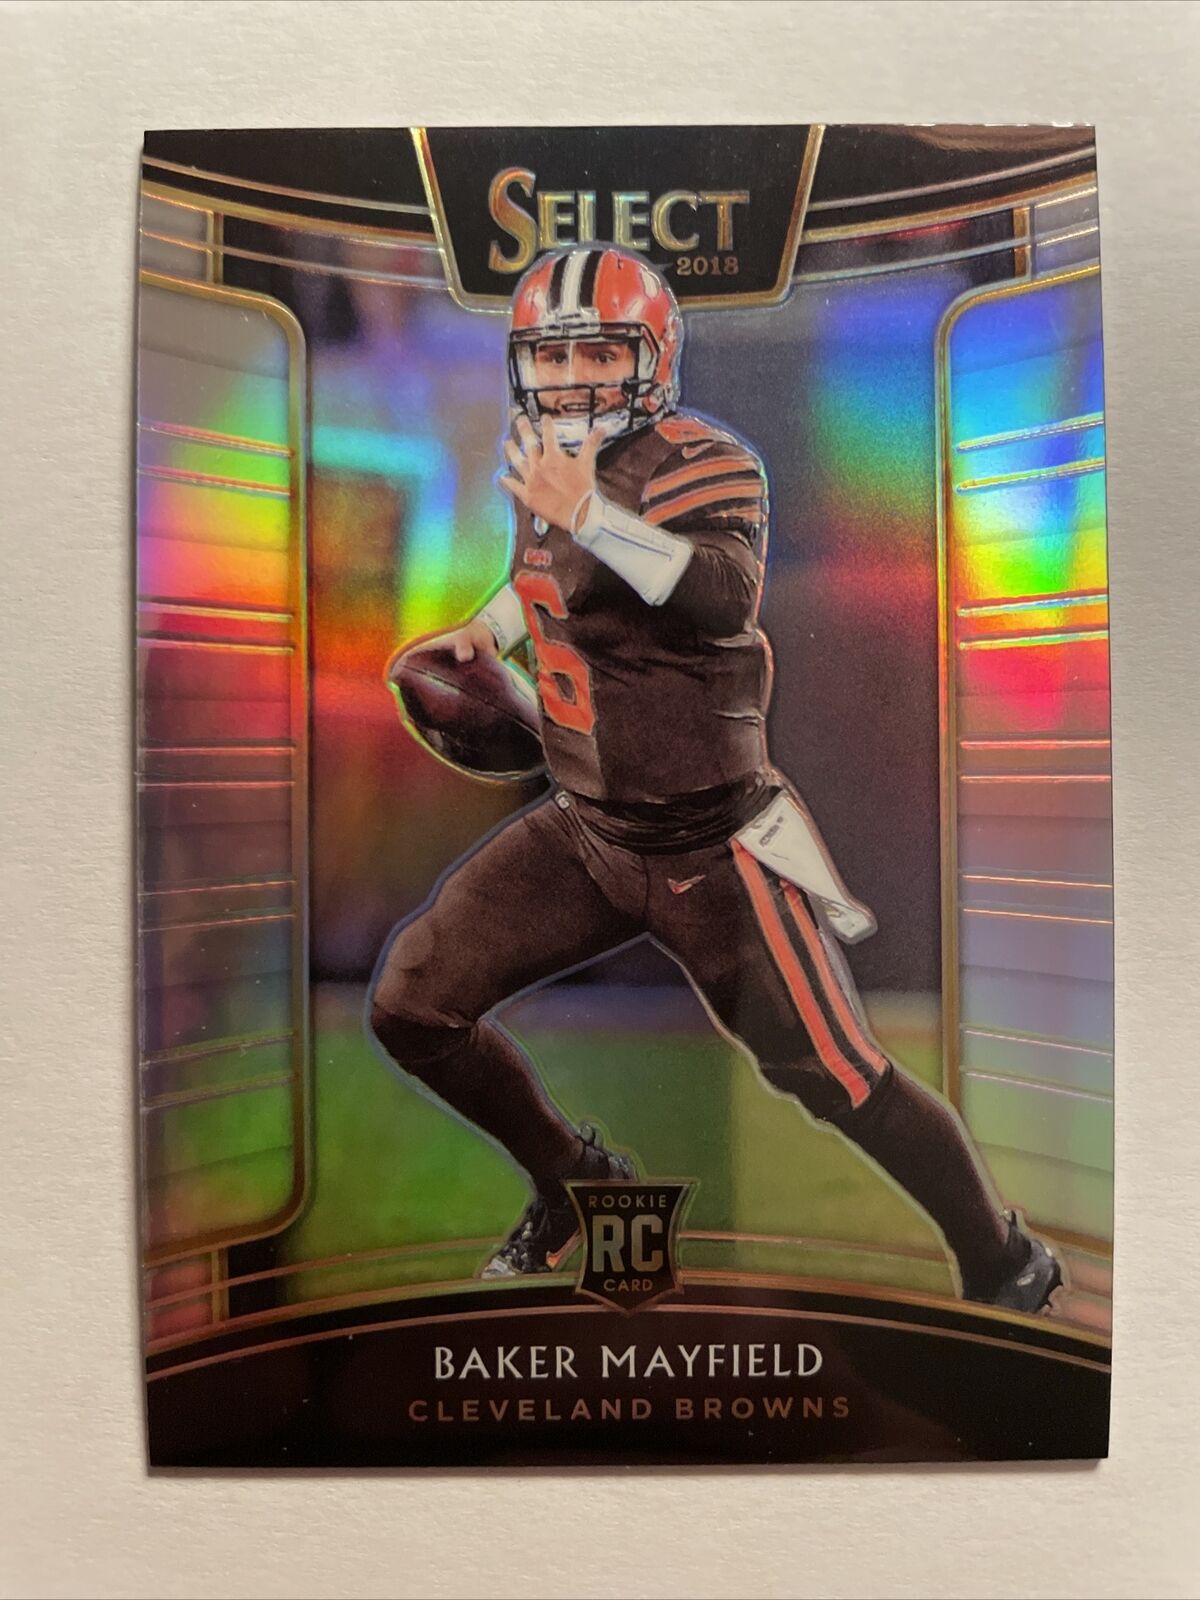 2018 Panini Select Baker Mayfield Concourse Silver Prizm Rookie # 30 NFL RC Card